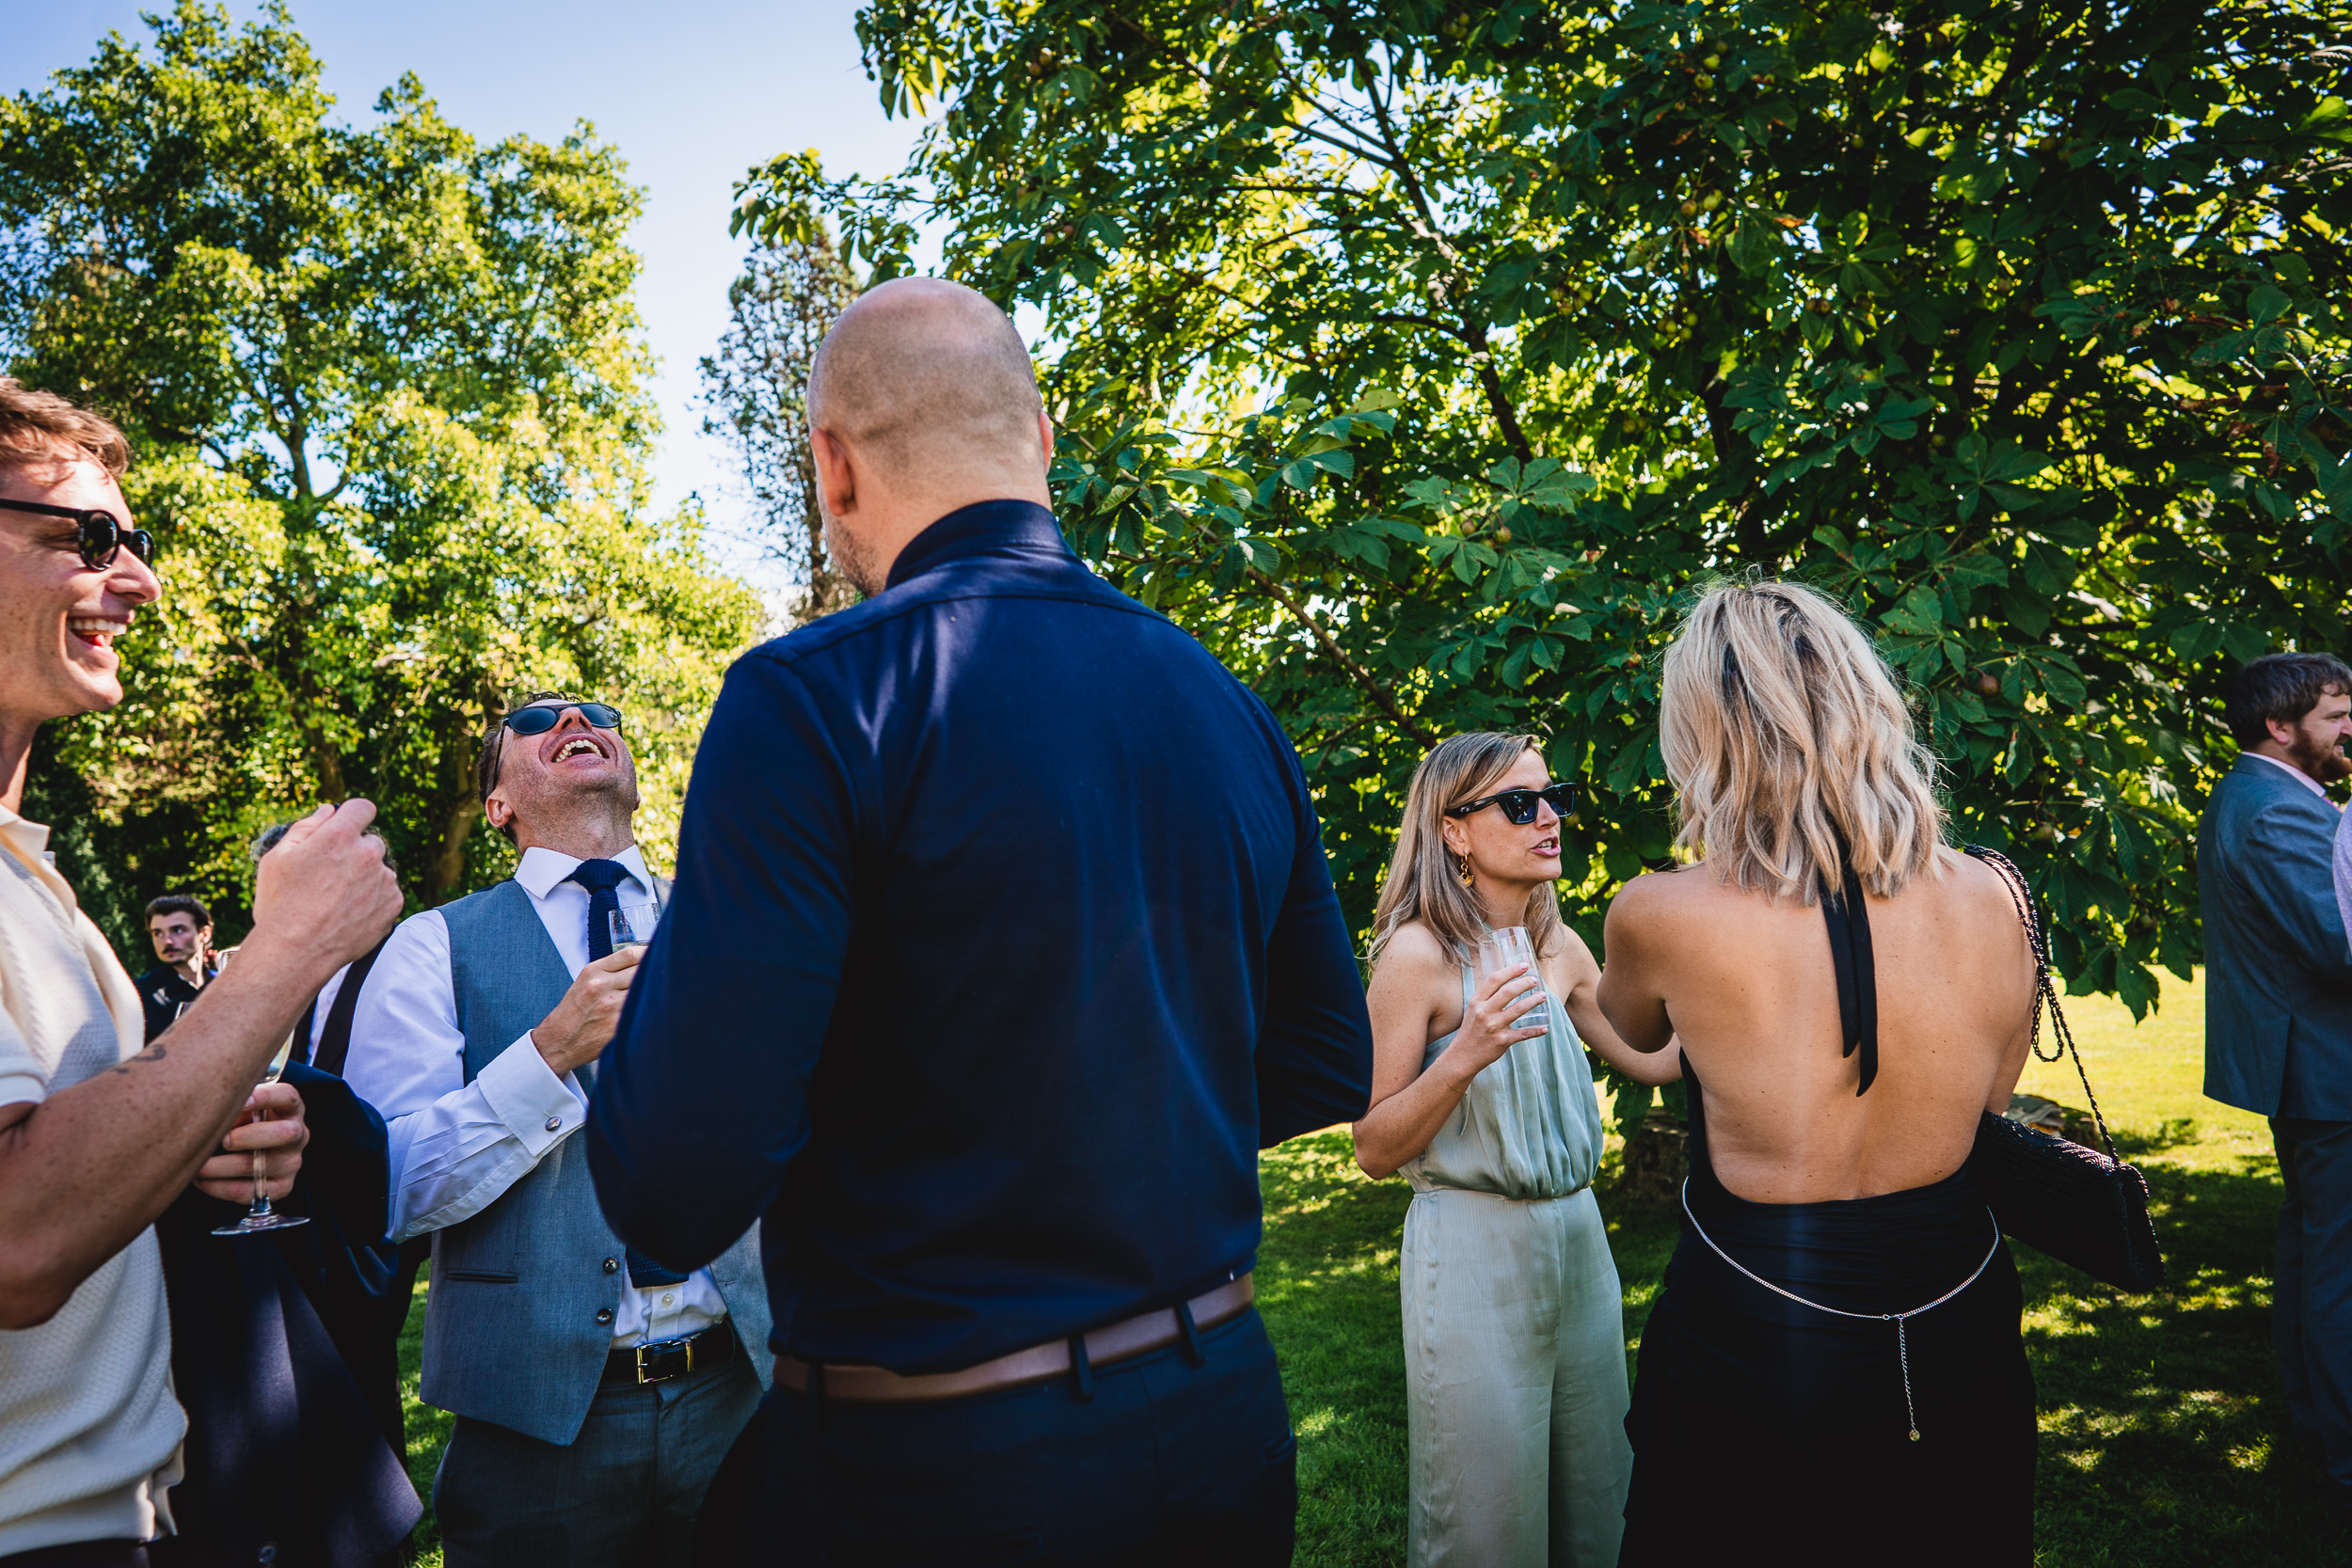 A group of people gathered around a Ridge Farm tree in Surrey during a wedding celebration.